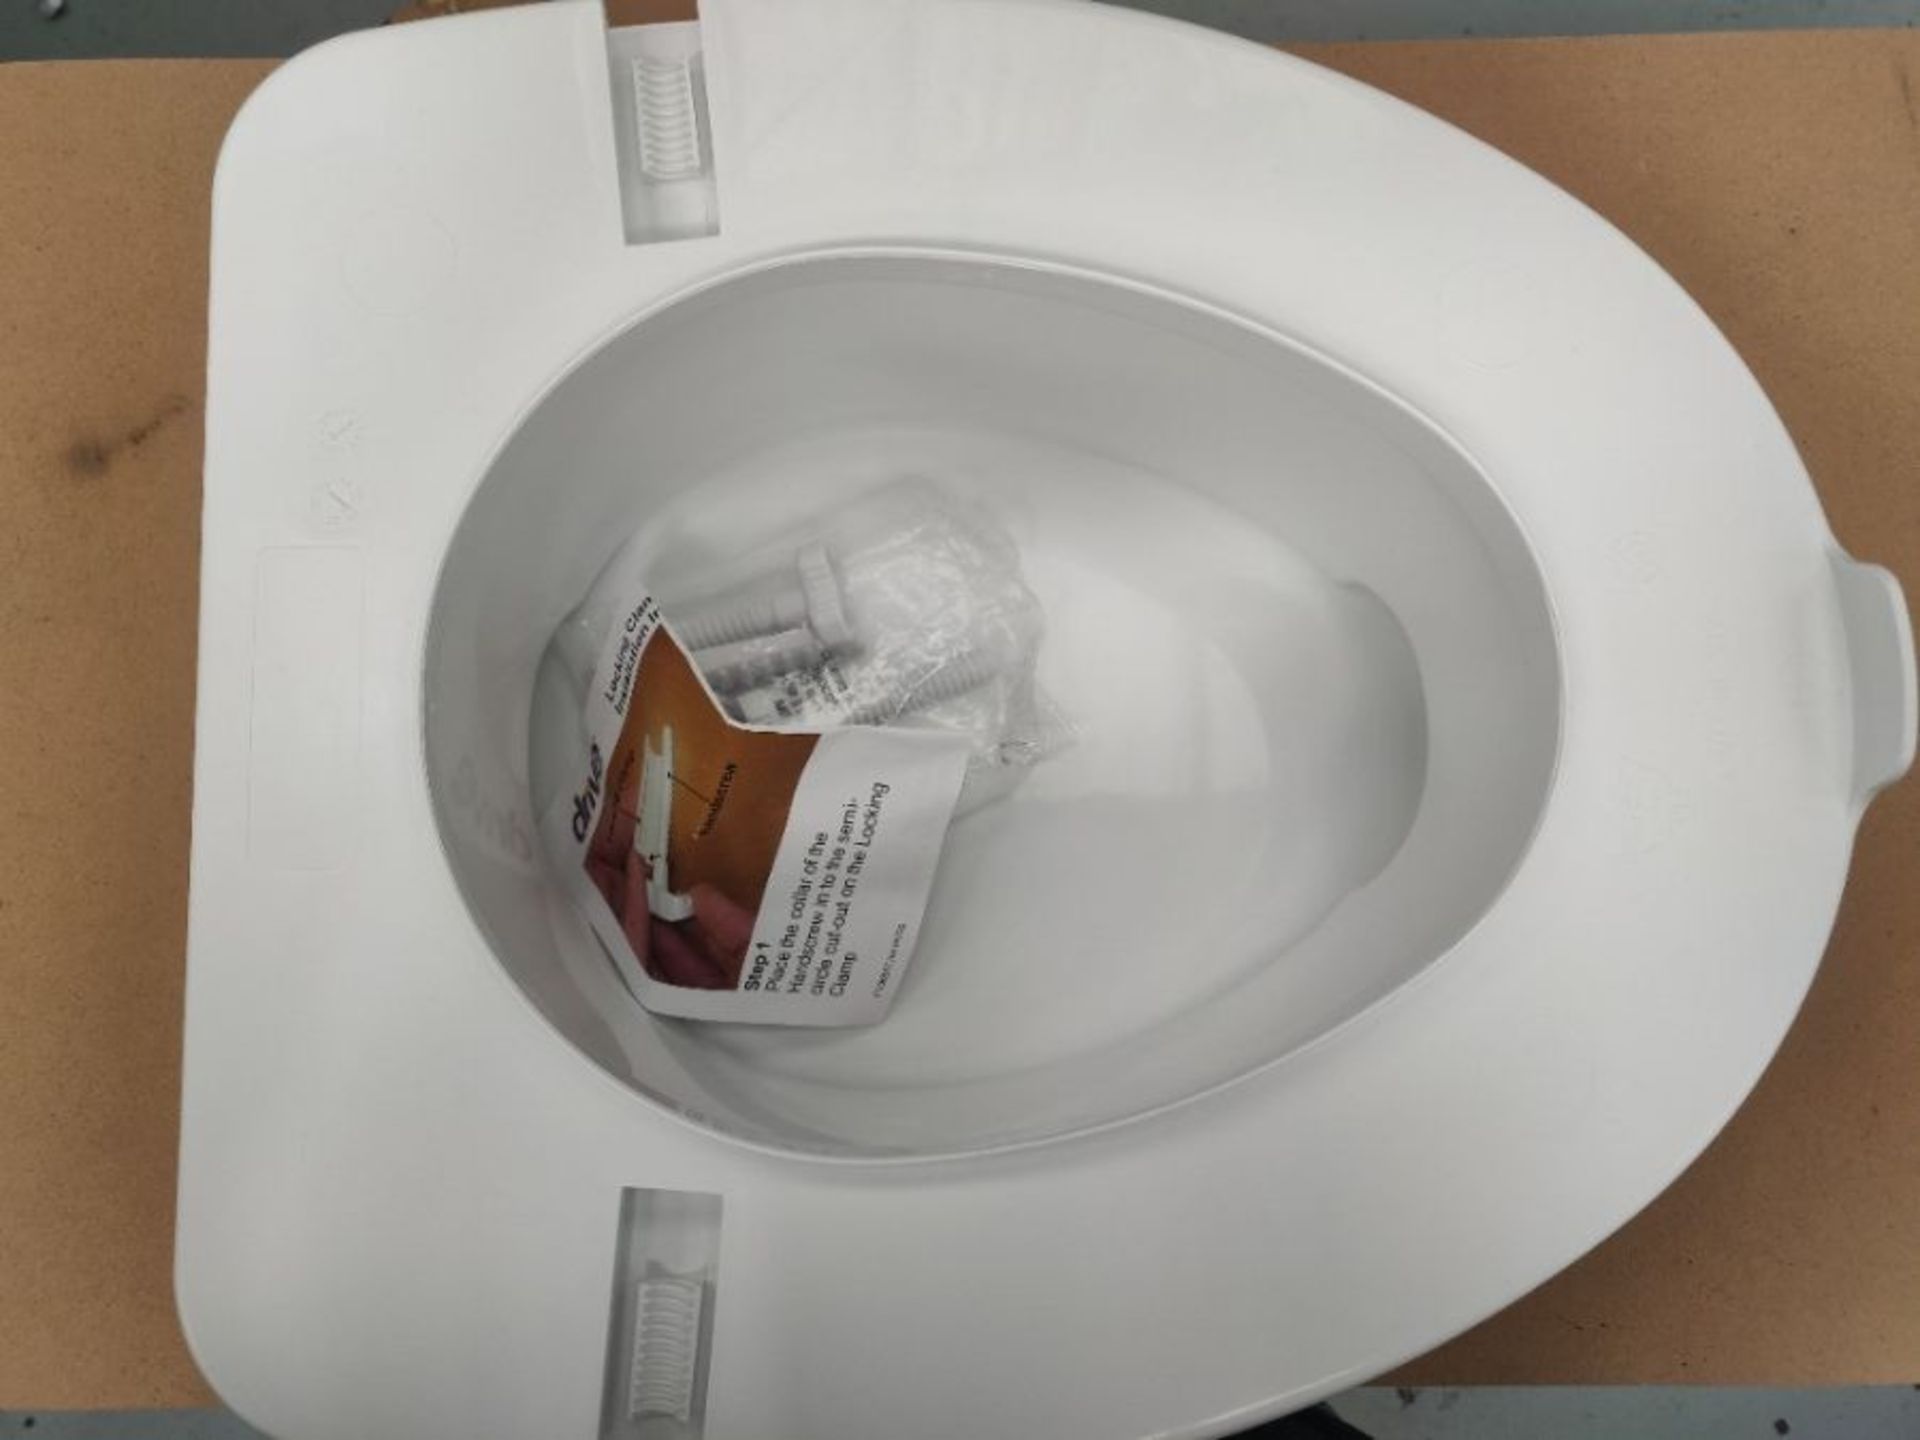 Drive 6 Inch Raised Toilet Seat with Lid - Image 2 of 2